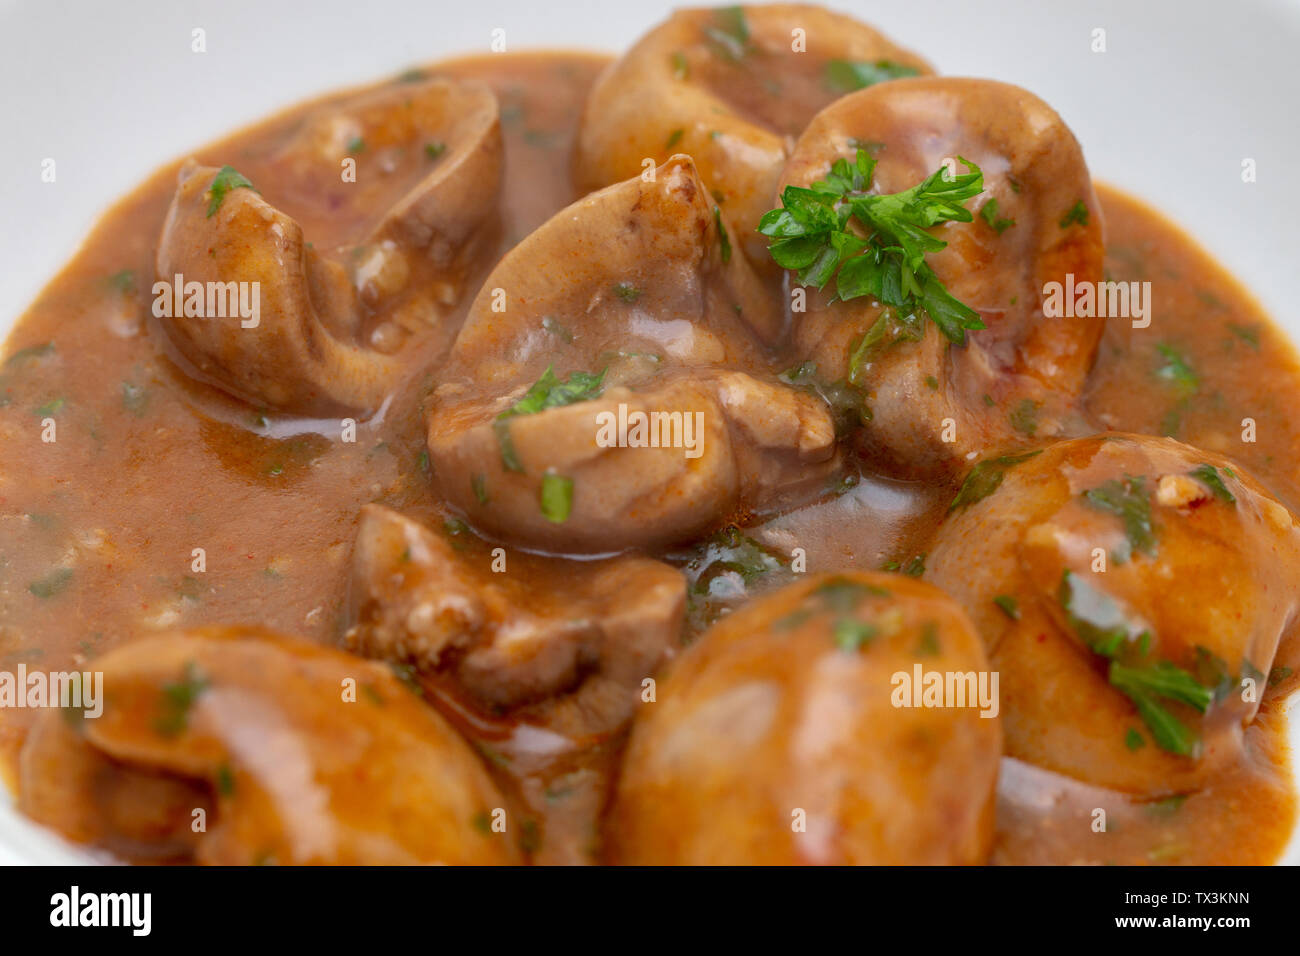 Close-up view of devilled (spicy) lambs' kidneys, in a brown sauce with chopped fresh parsley, an old-fashioned British breakfast dish. Stock Photo